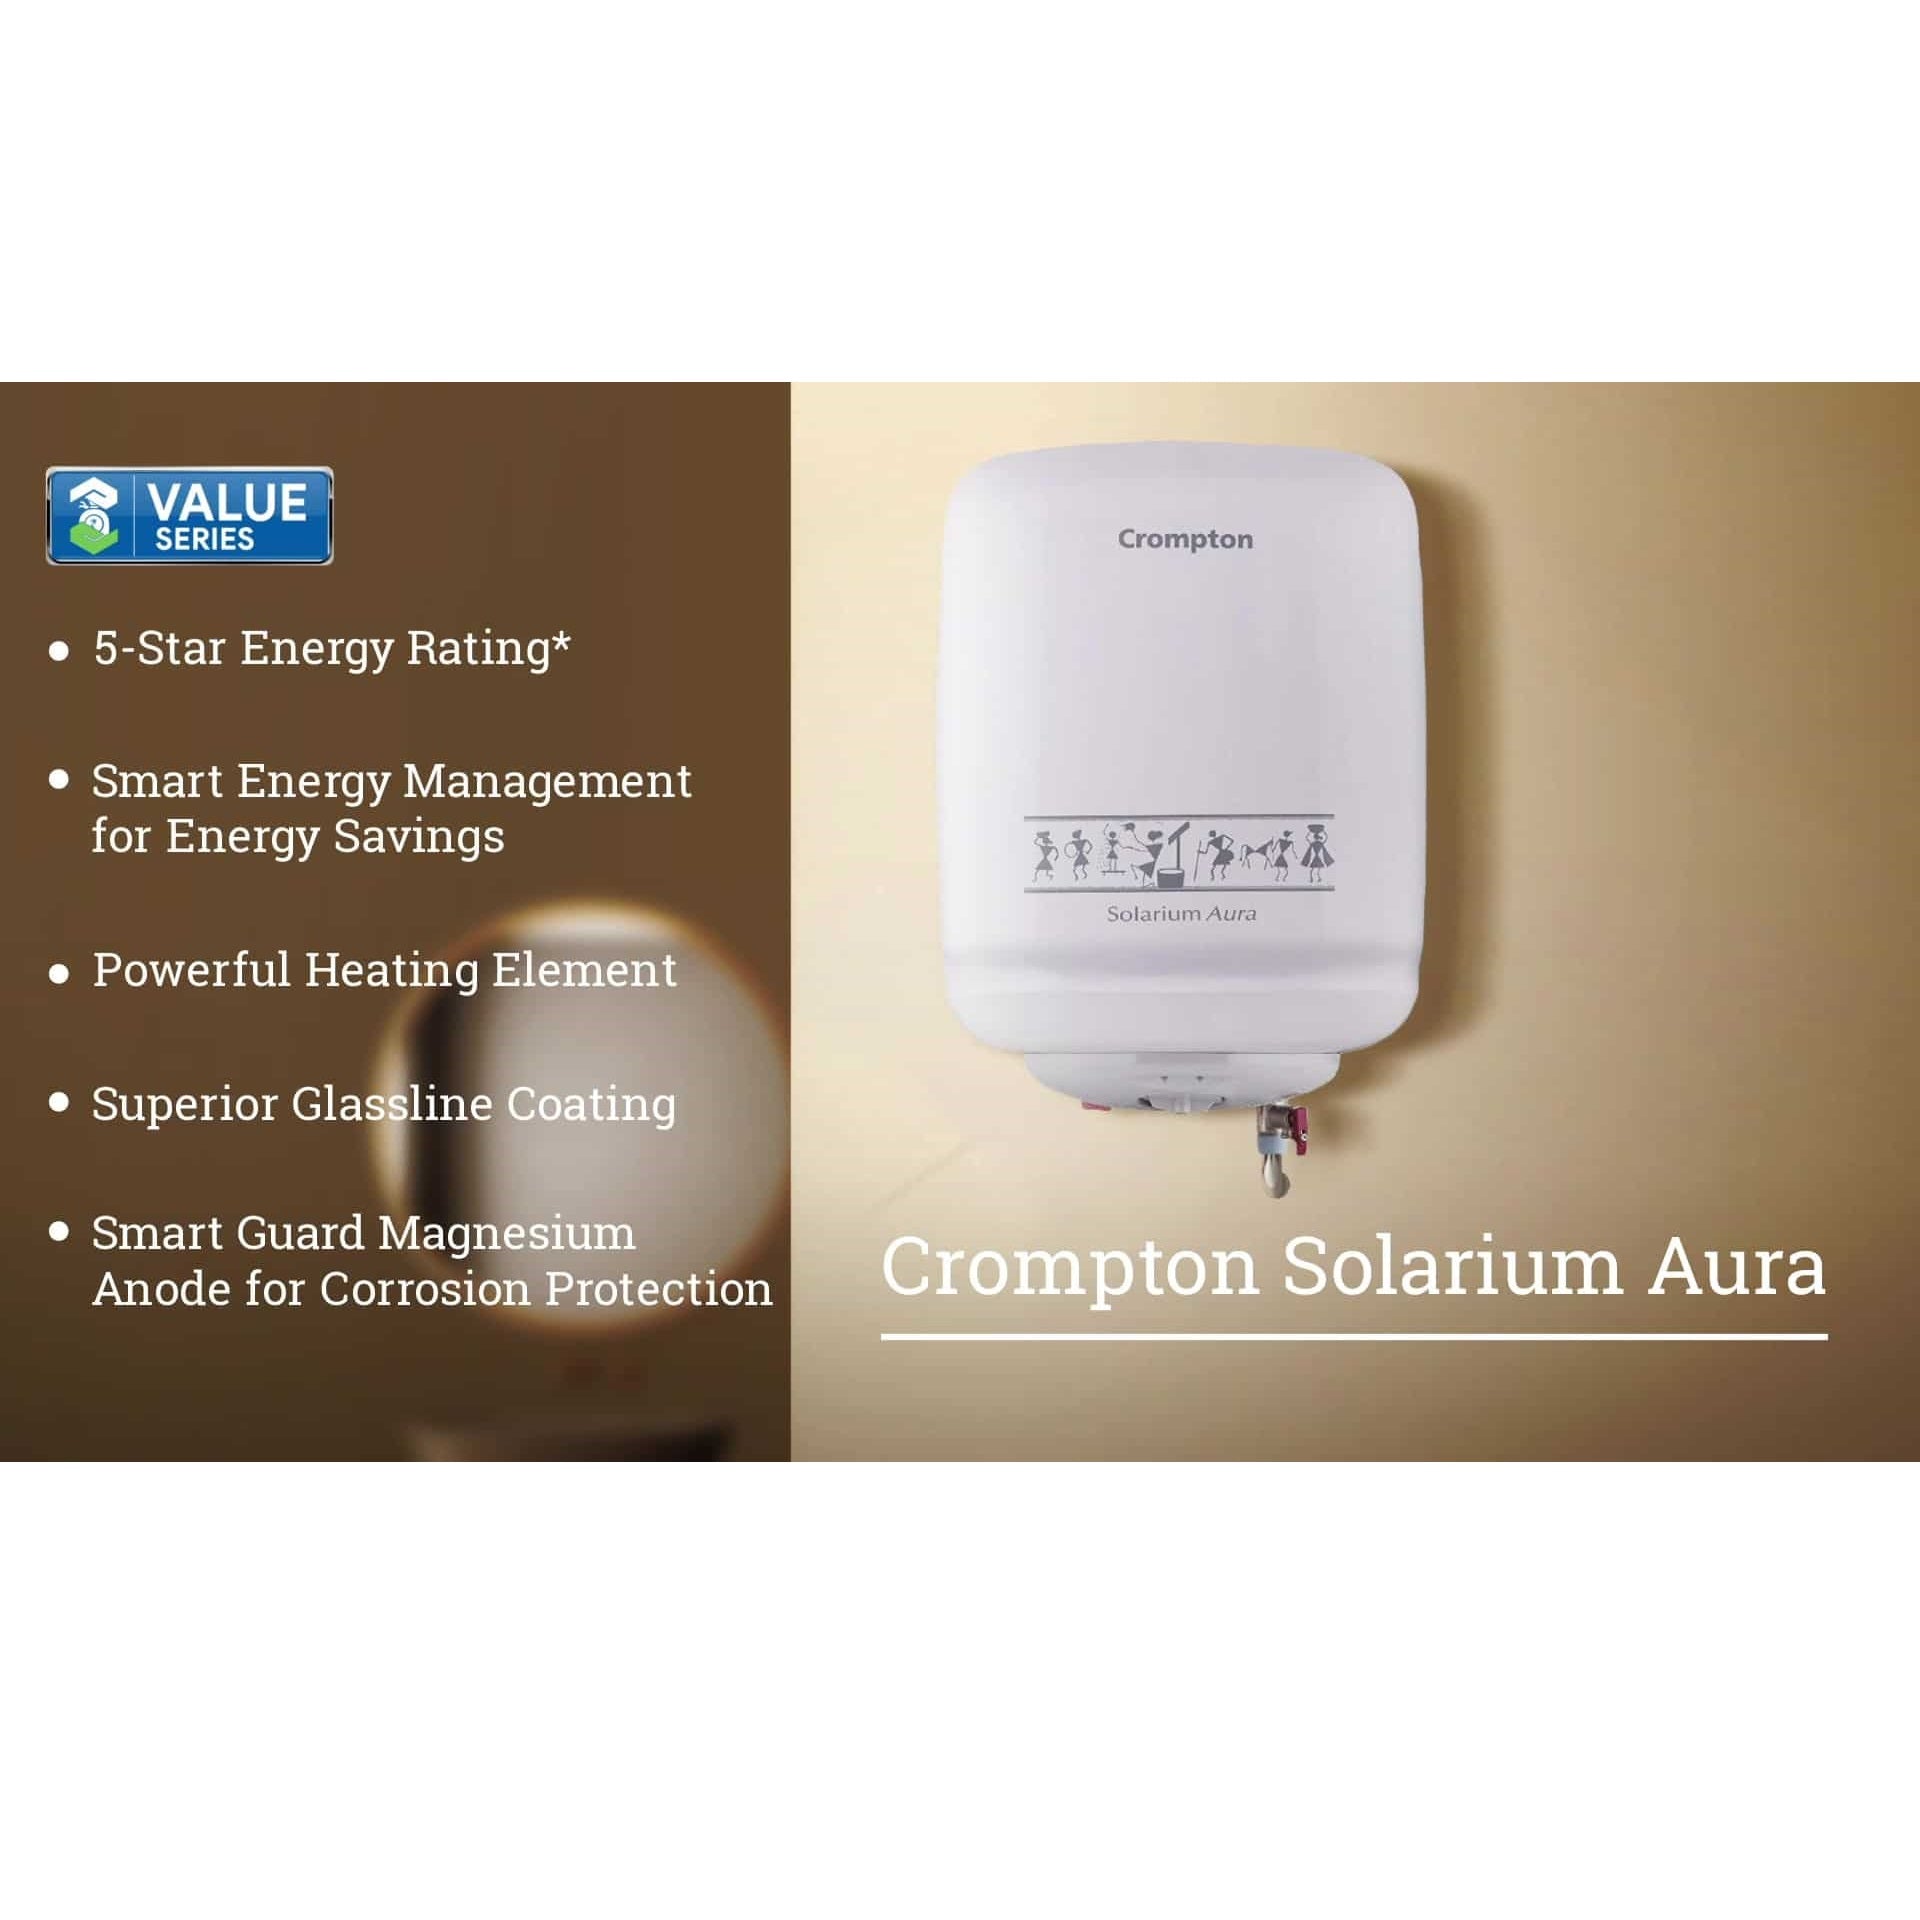 Crompton Water Heater 10L Capacity 5 Star Rated withPowerful Heating Element Solarium Aura